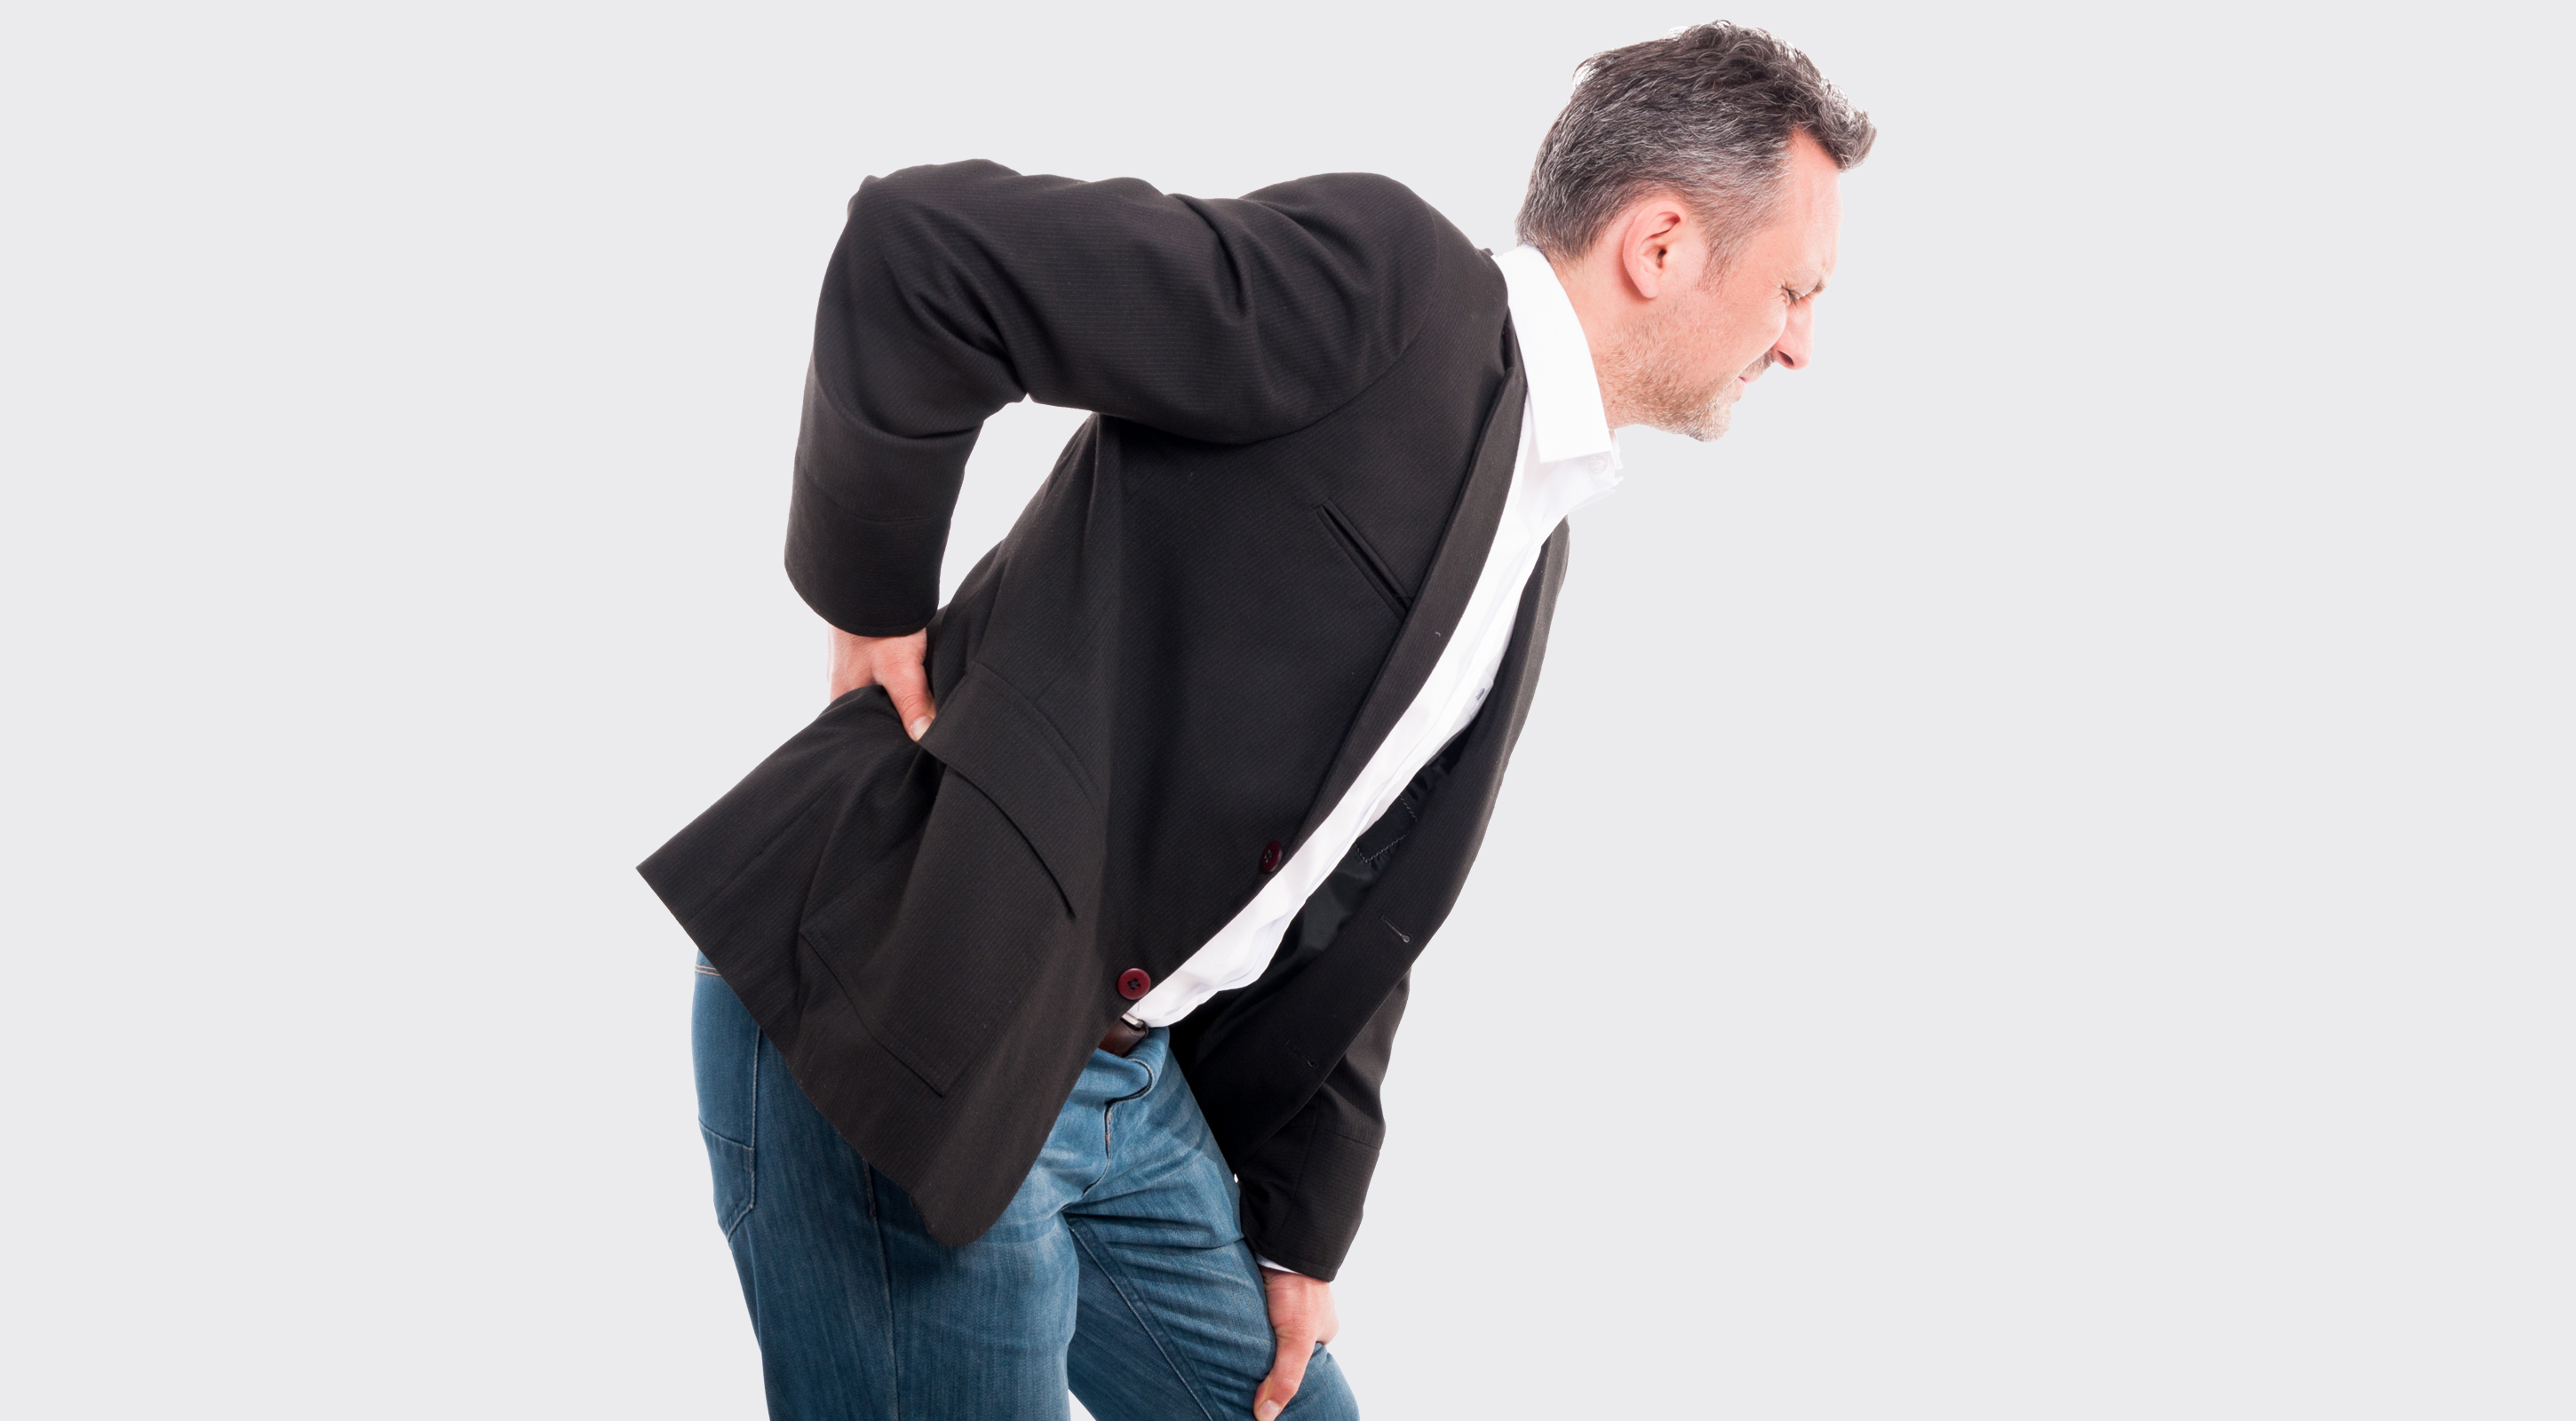 La Grande back pain controlled with chiropractic care 